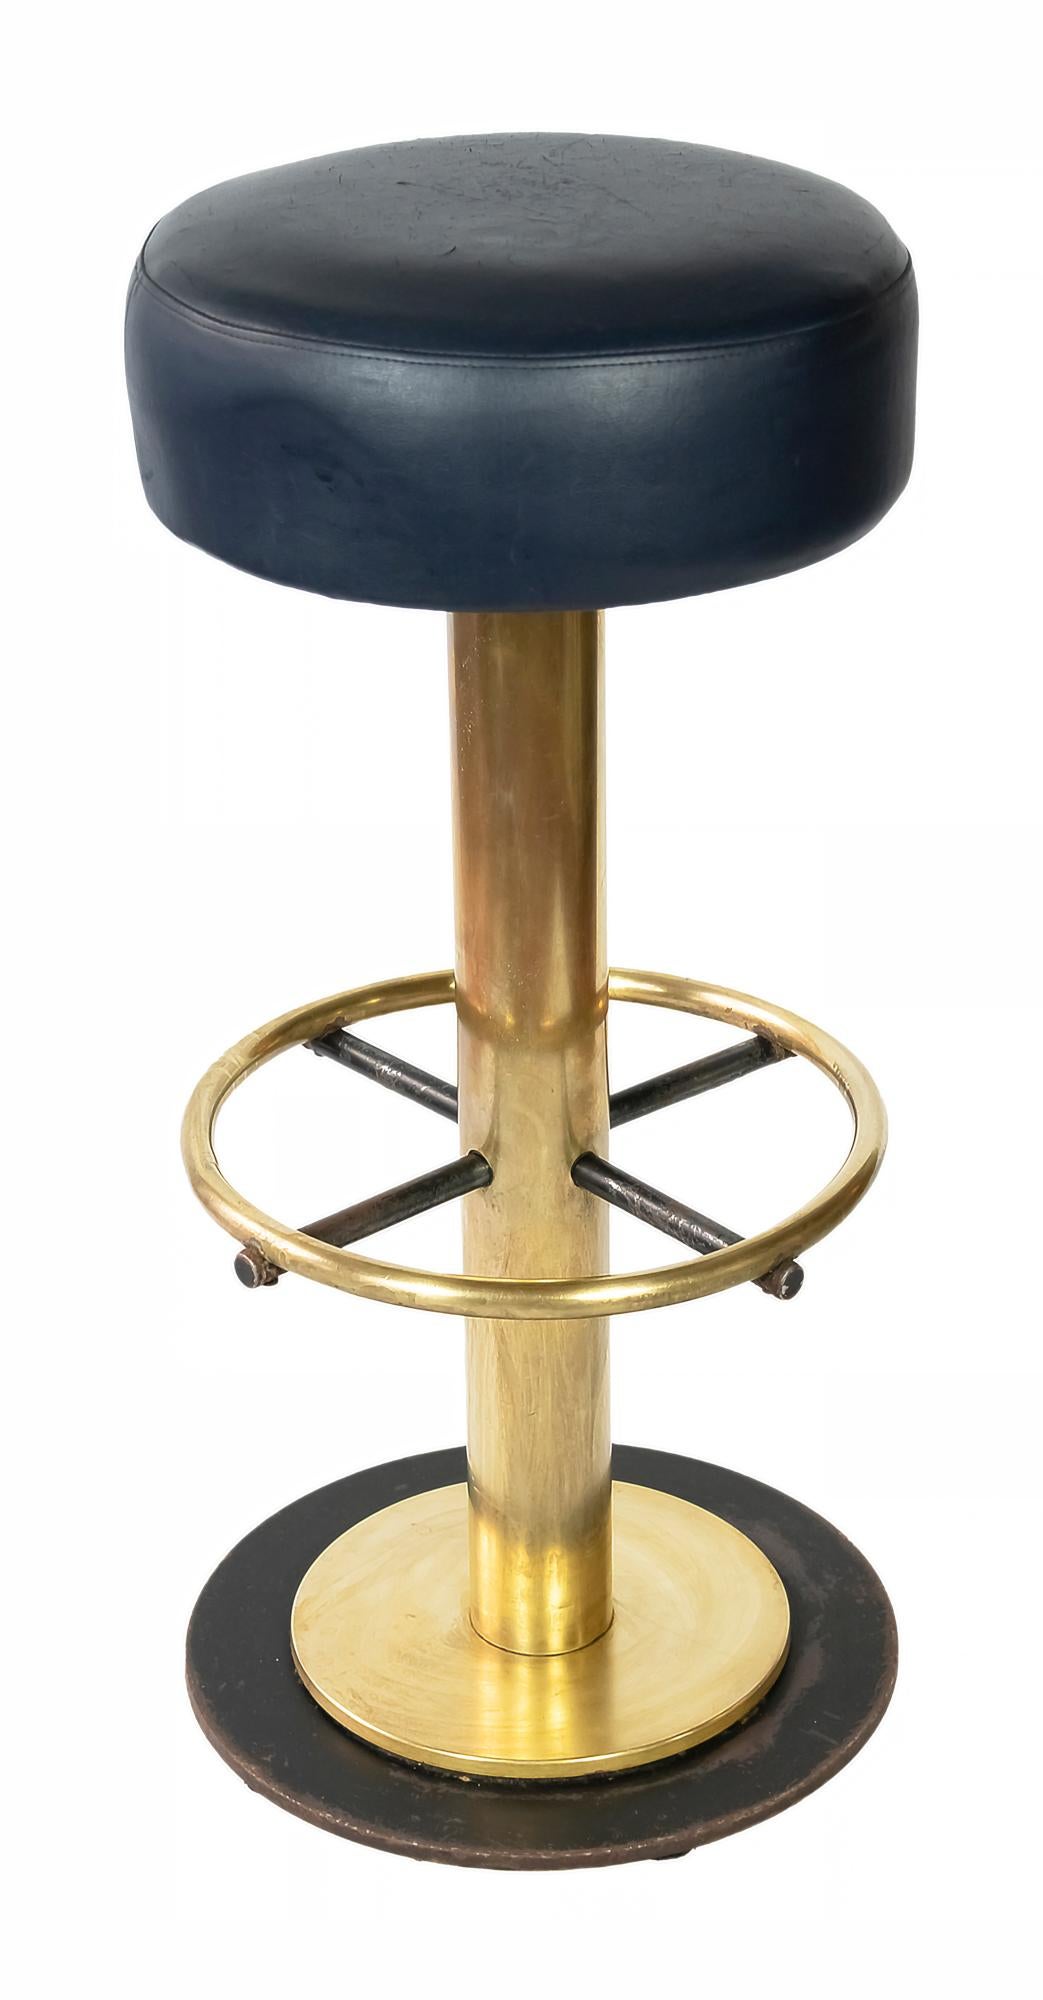 Set of 10 pcs. Mid-Century Italian swivel bar stools/chairs.
The base is made of brass and steel with dark blue leatherette upholstery.
Each stool weights 27 kg.
Very good vintage condition.